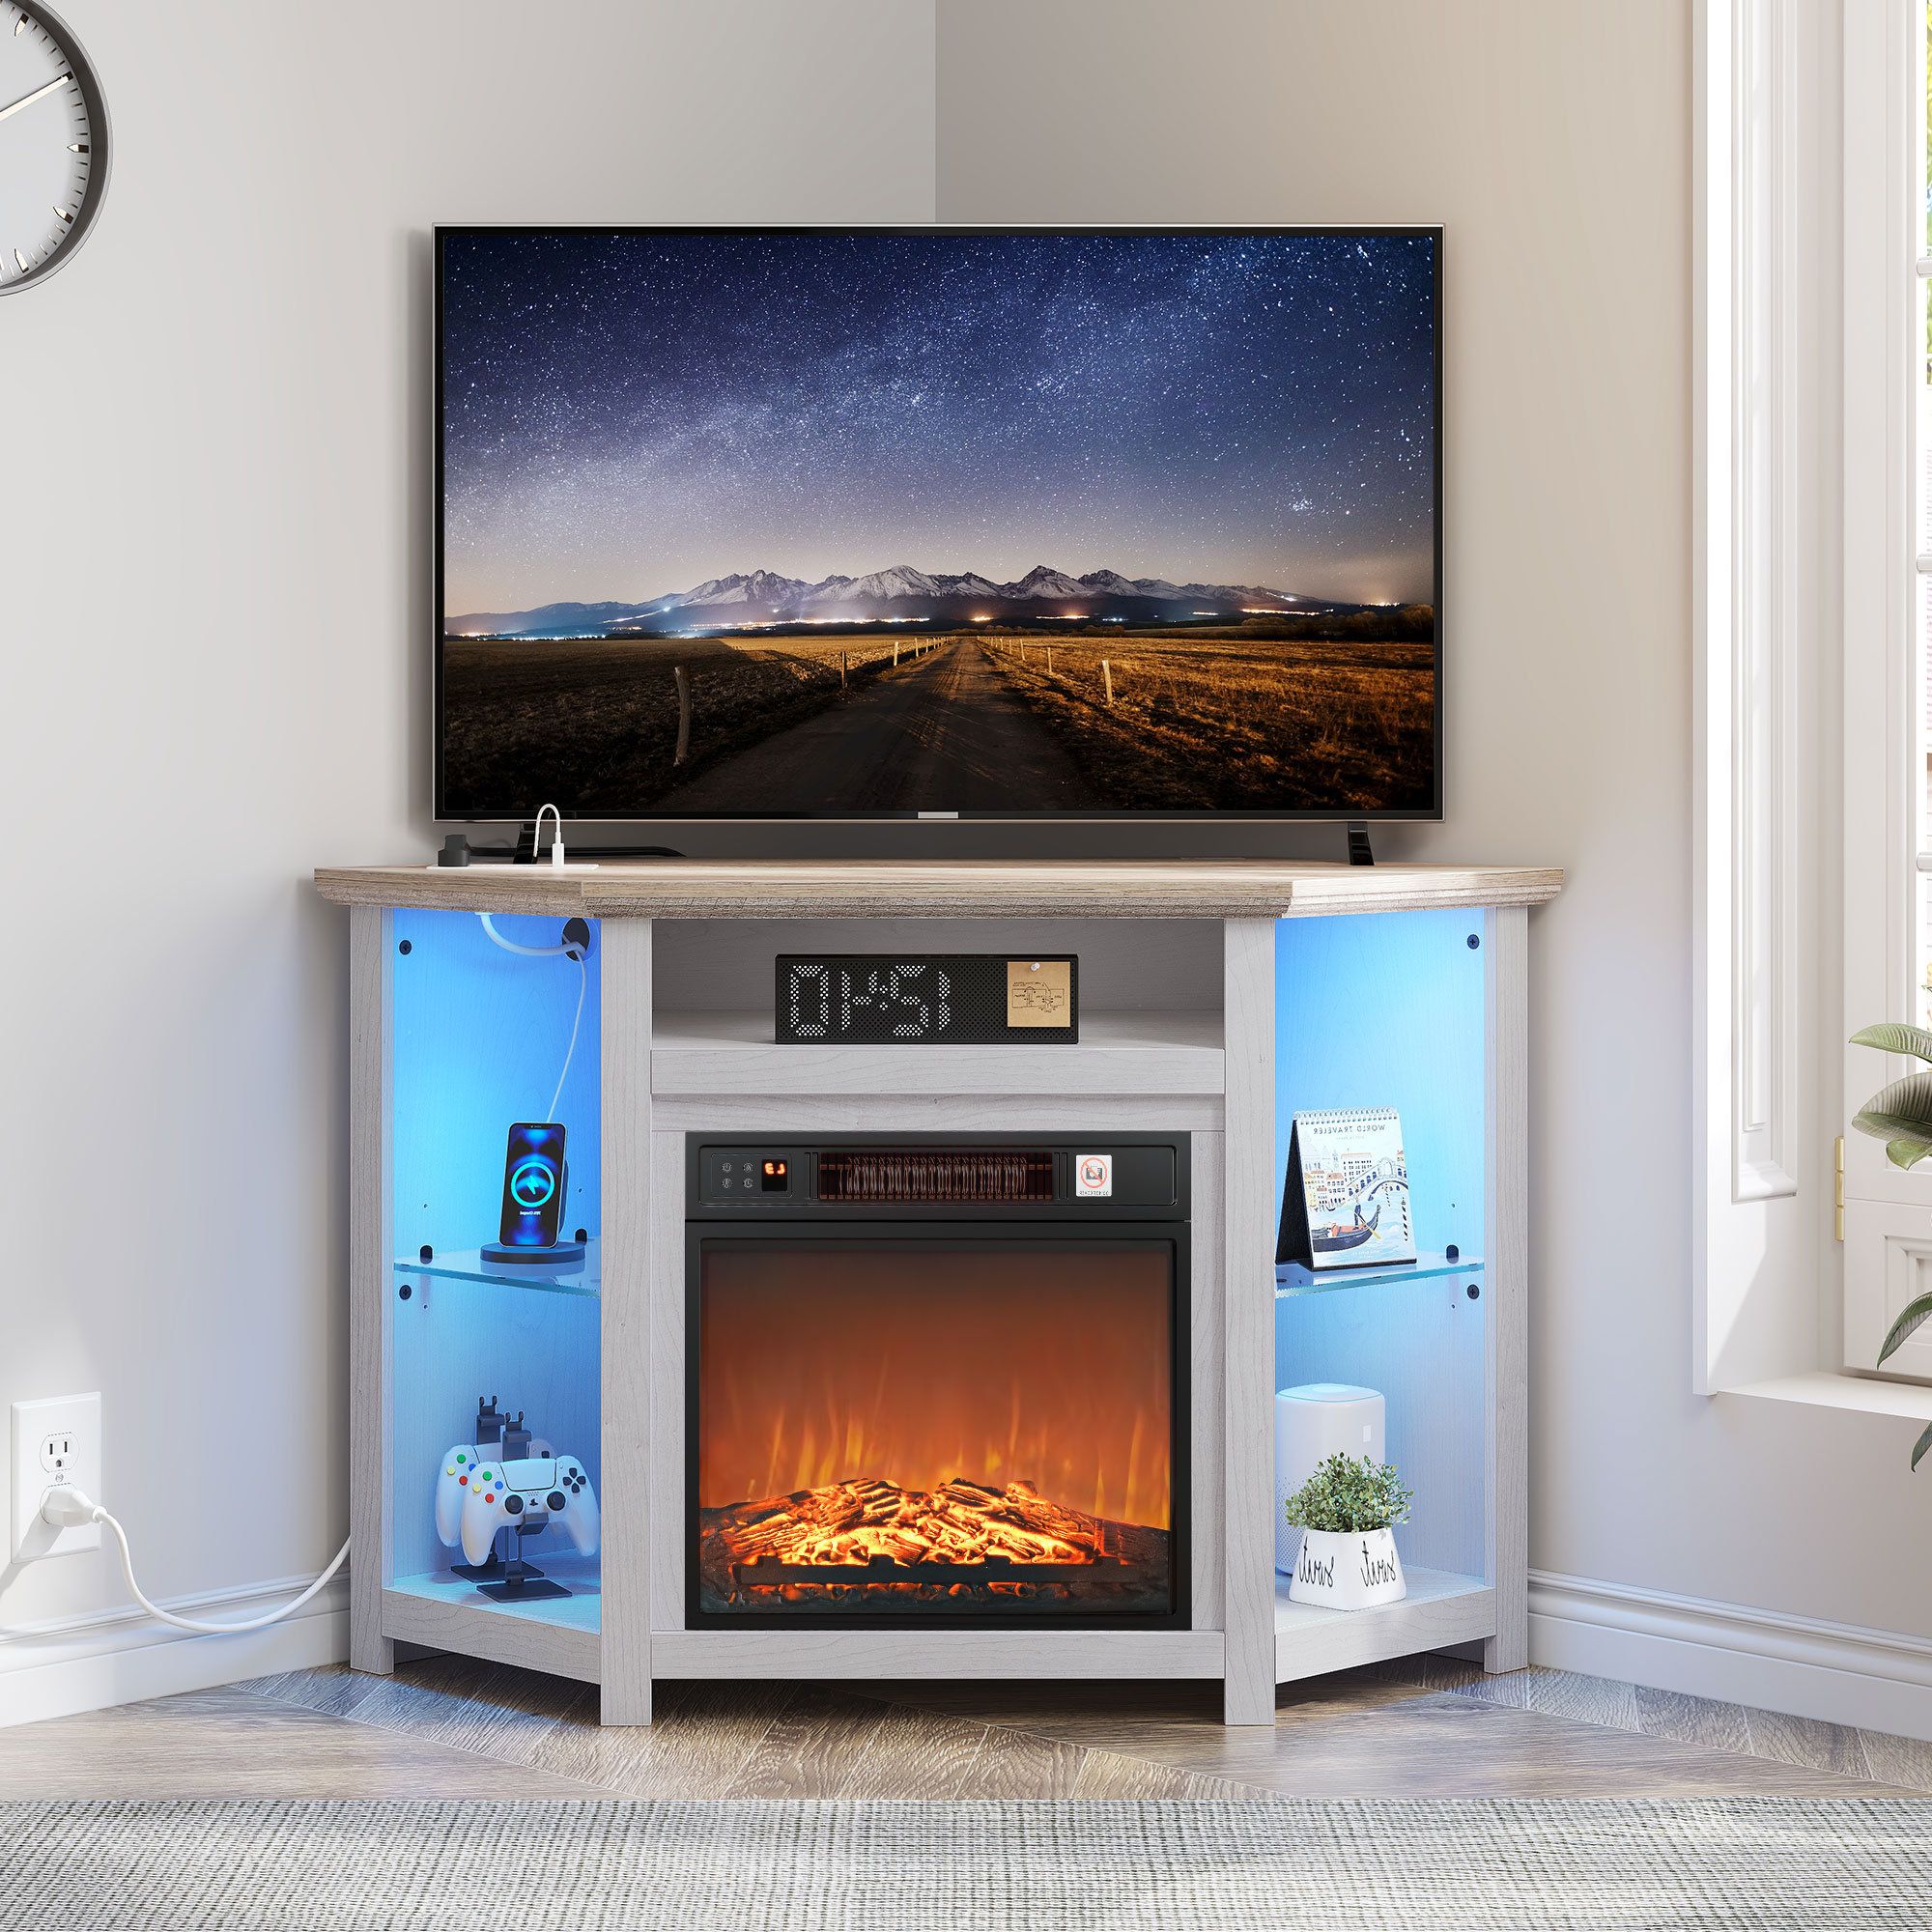 Wrought Studio Gladston Led Corner Tv Stand With Power Outlet For Living  Room With Electric Fireplace Included | Wayfair Inside Led Tv Stands With Outlet (View 11 of 20)